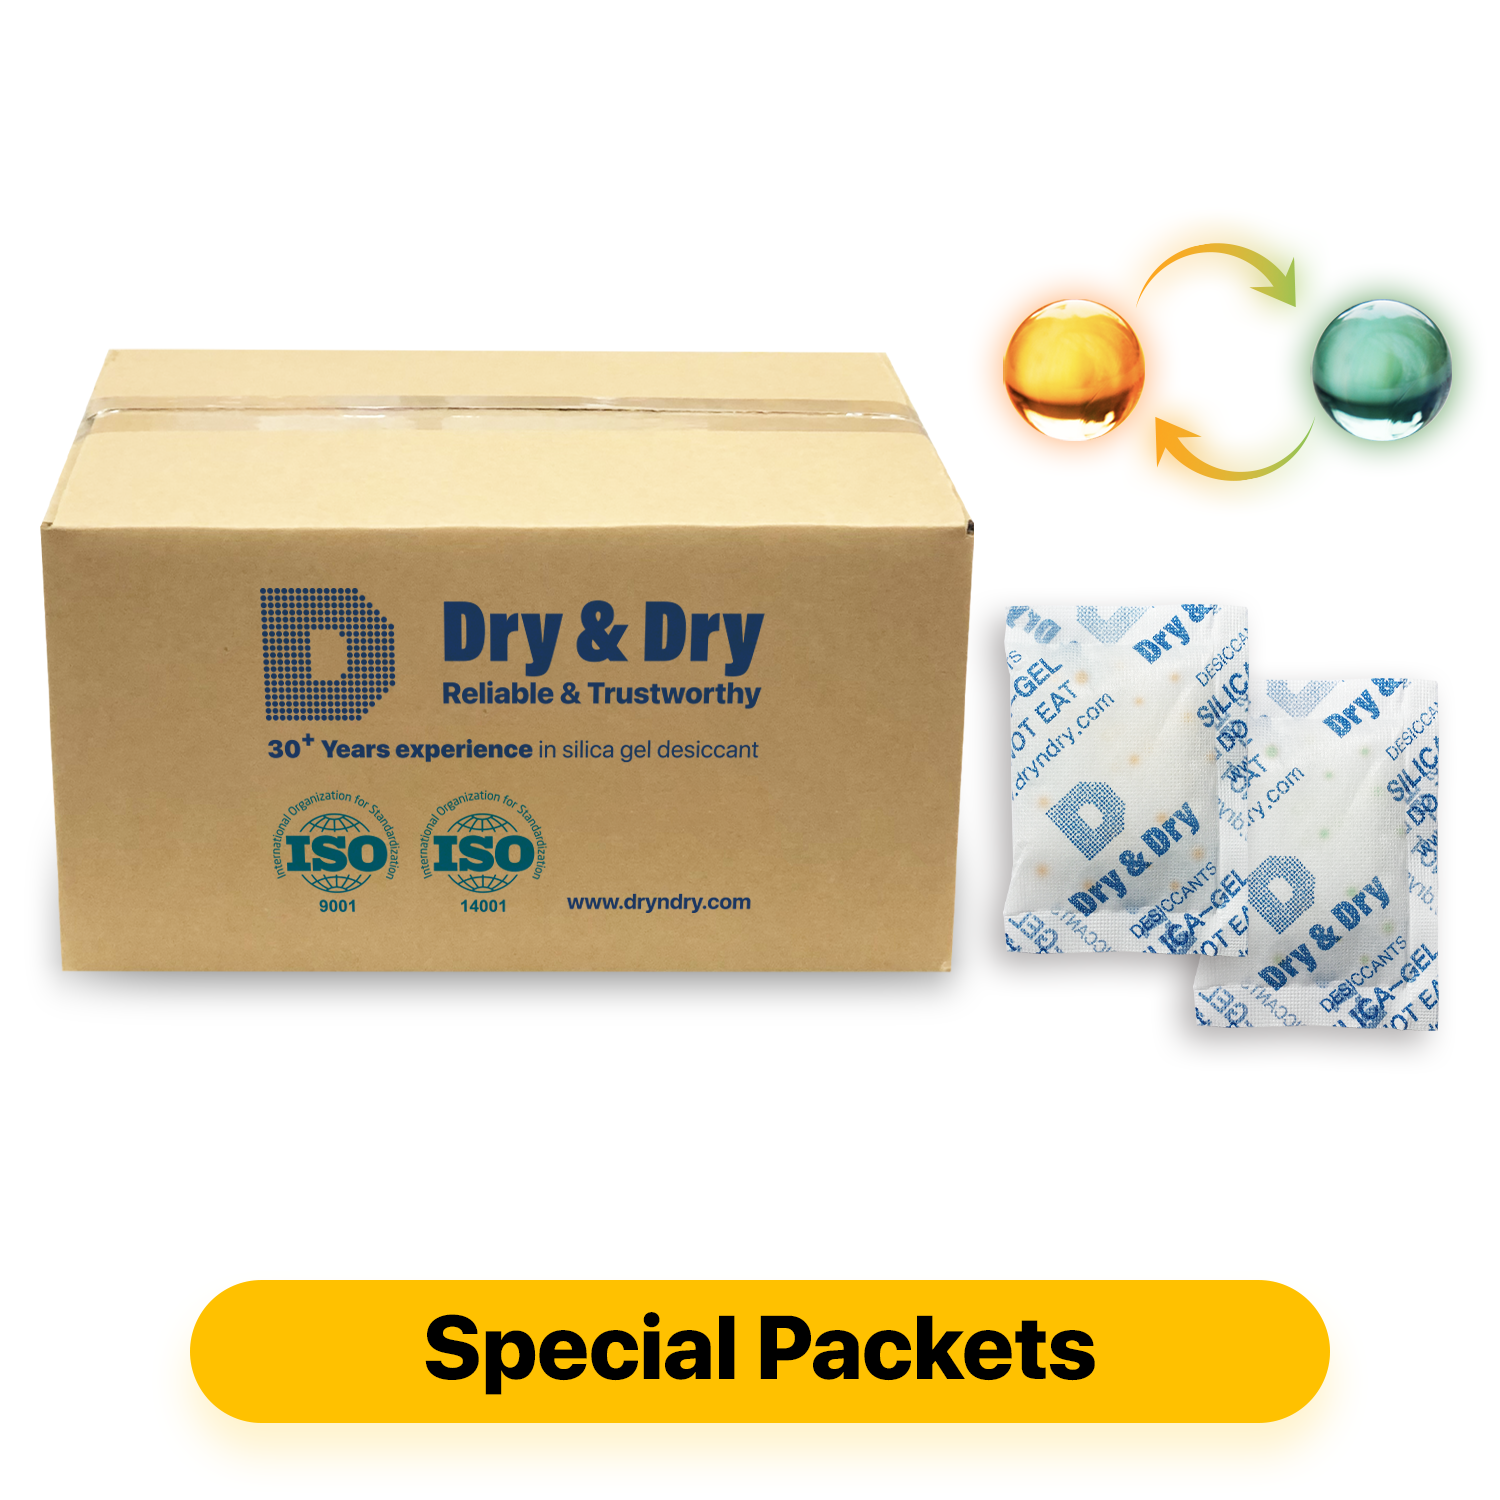 20 Gram [800 Packs] Dry & Dry SPECIAL Food Safe Orange Indicating(Orange  to Dark Green) Mixed Silica Gel Packets - Rechargeable(FDA Compliant)